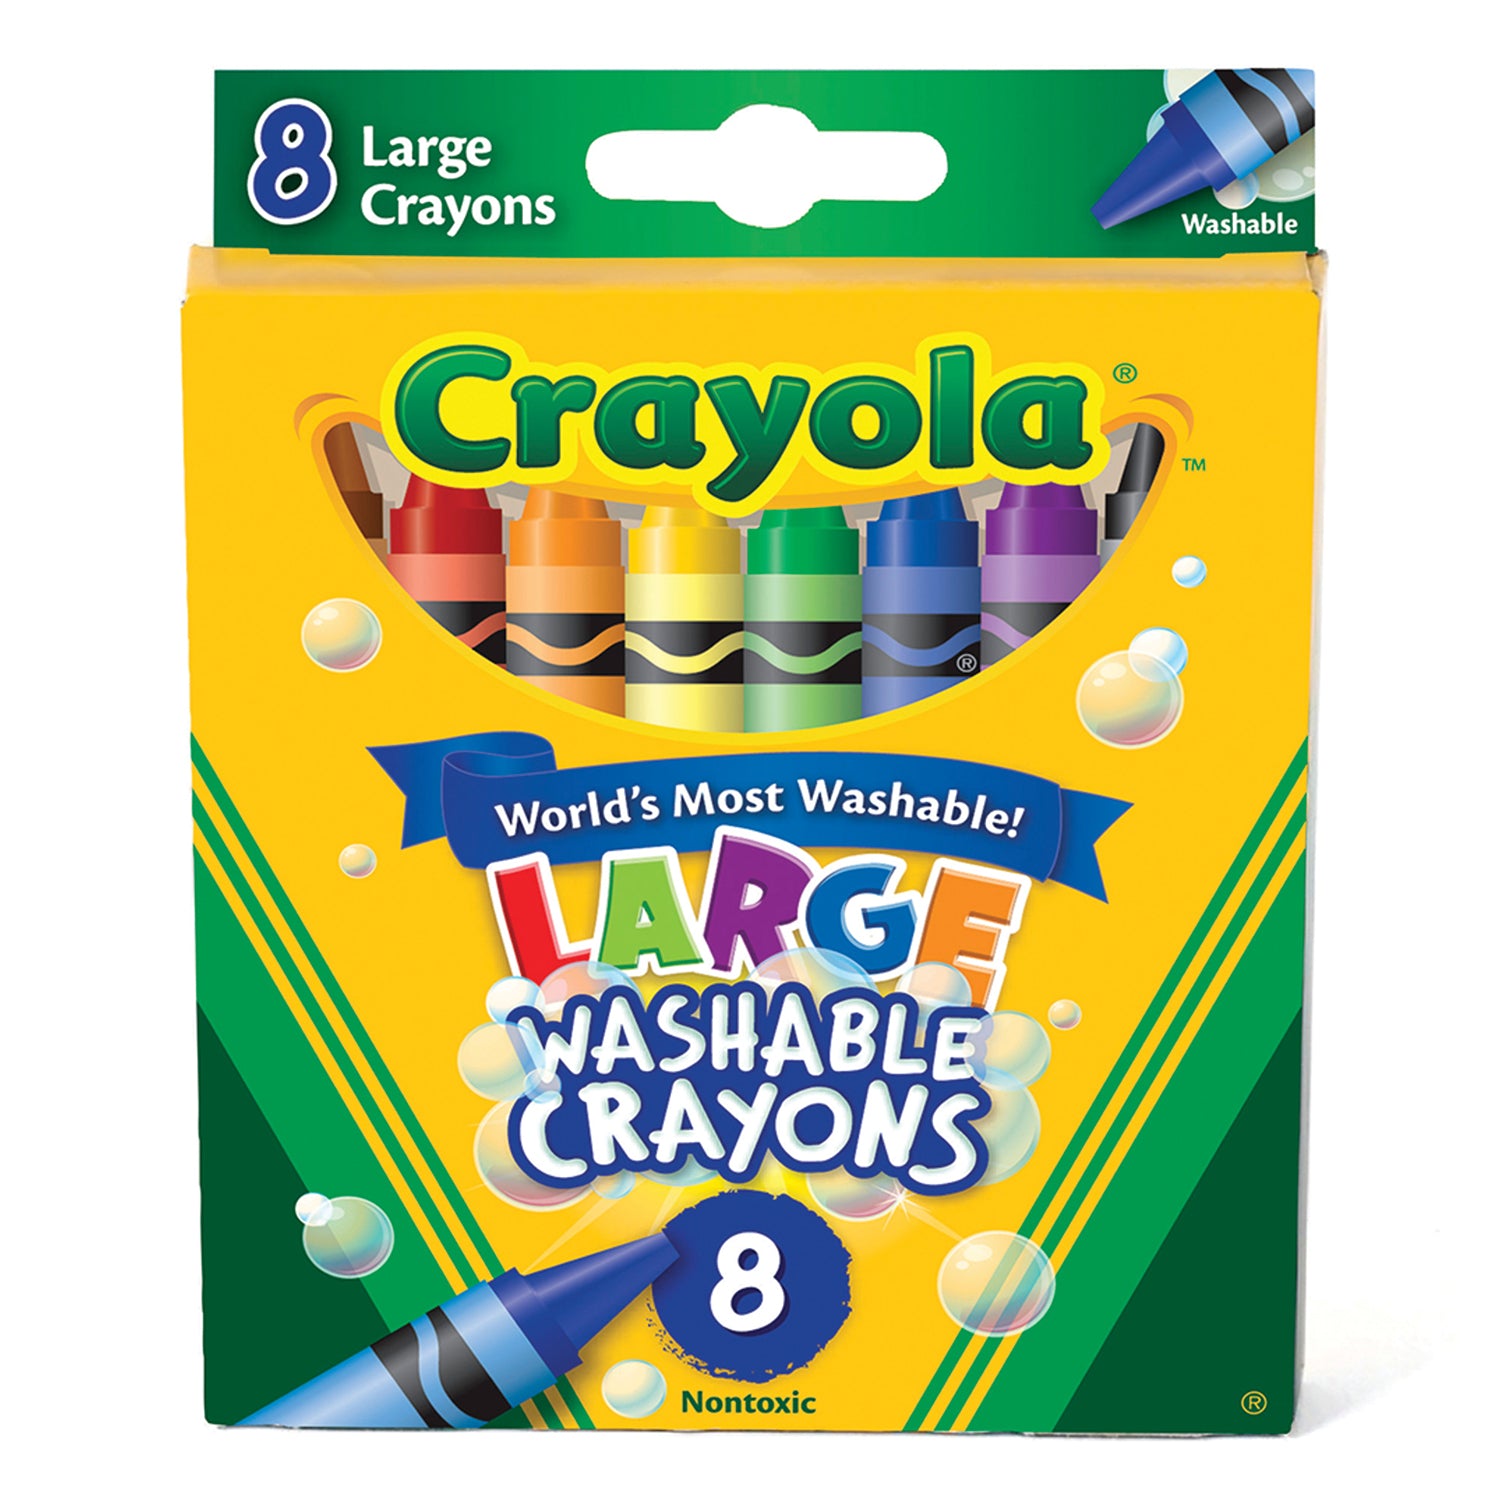 Crayola Wooden Art Set, Over 75 Pieces, Gift for Kids, 8, 9, 10, 11